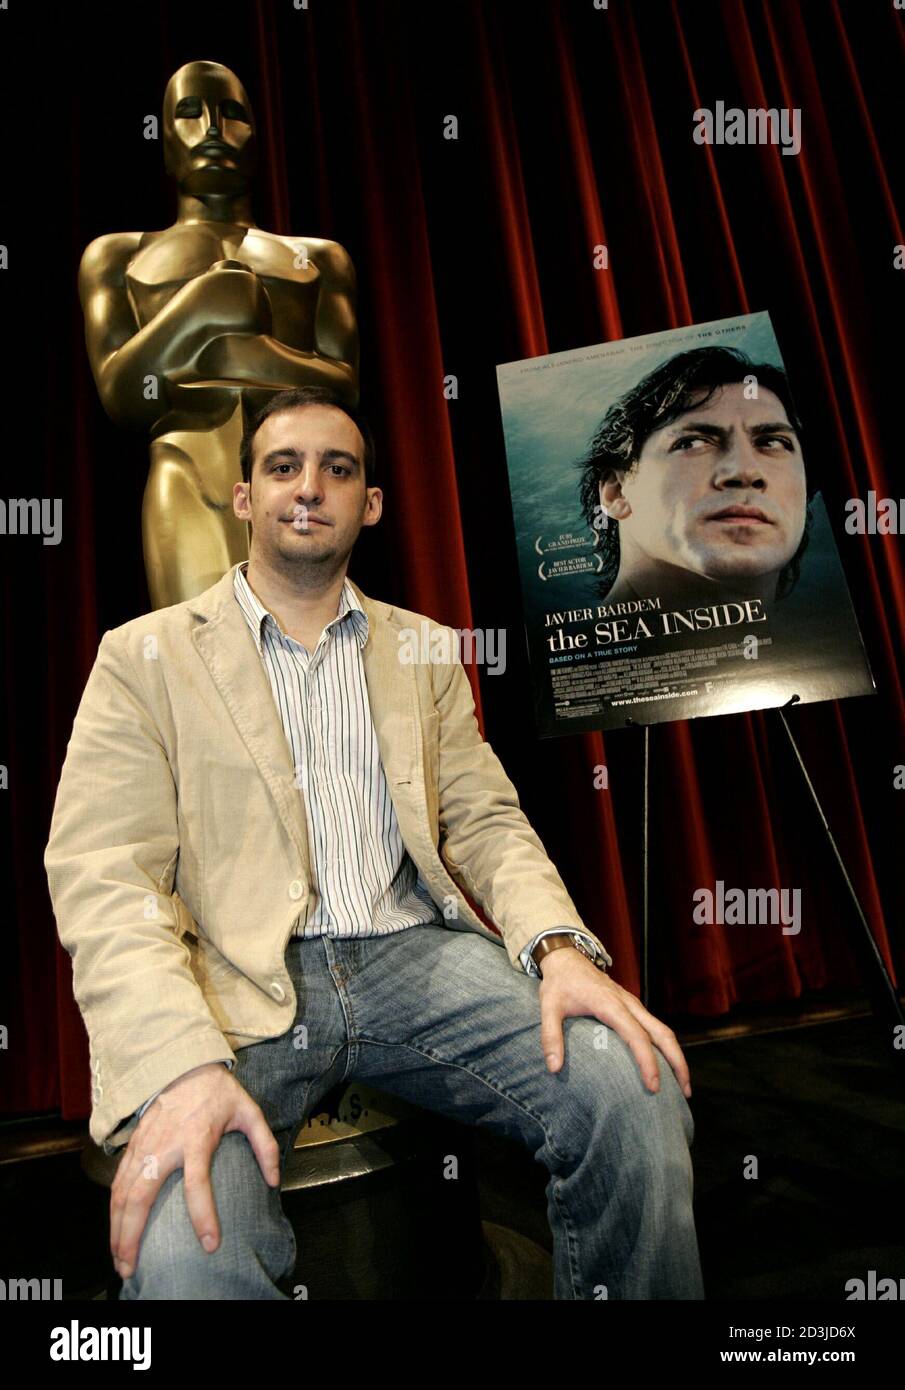 Alejandro Amenabar of Spain, director of 'The Sea Inside', poses for photographers at the 77th Annual Academy Awards Foreign Language Film Award Nominees Directors presentation in Beverly Hills, February 25, 2005. Stock Photo